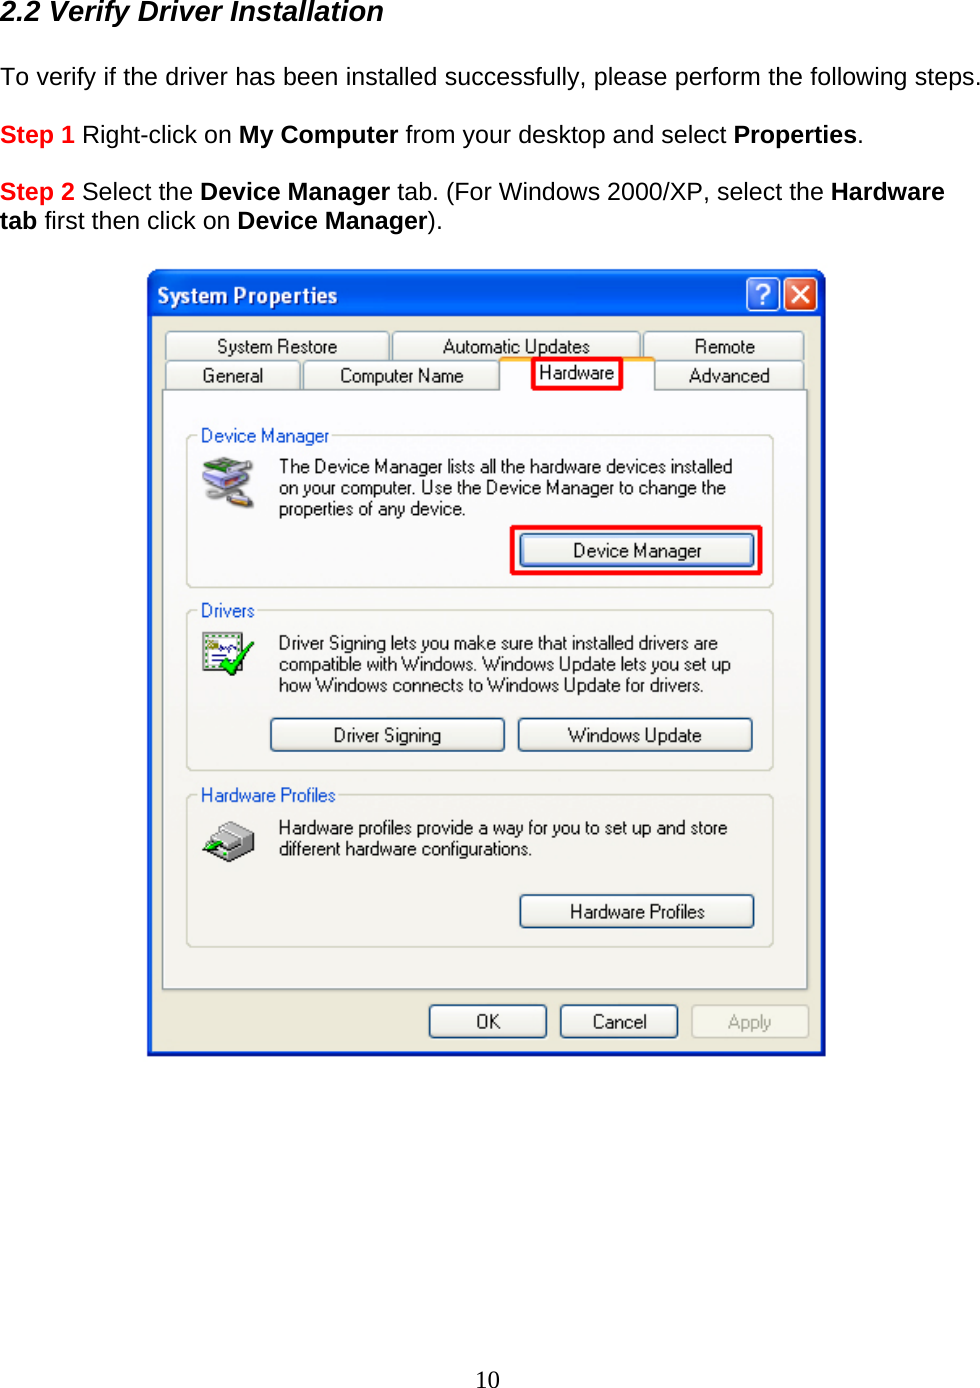 10 2.2 Verify Driver Installation  To verify if the driver has been installed successfully, please perform the following steps.  Step 1 Right-click on My Computer from your desktop and select Properties.  Step 2 Select the Device Manager tab. (For Windows 2000/XP, select the Hardware tab first then click on Device Manager).           